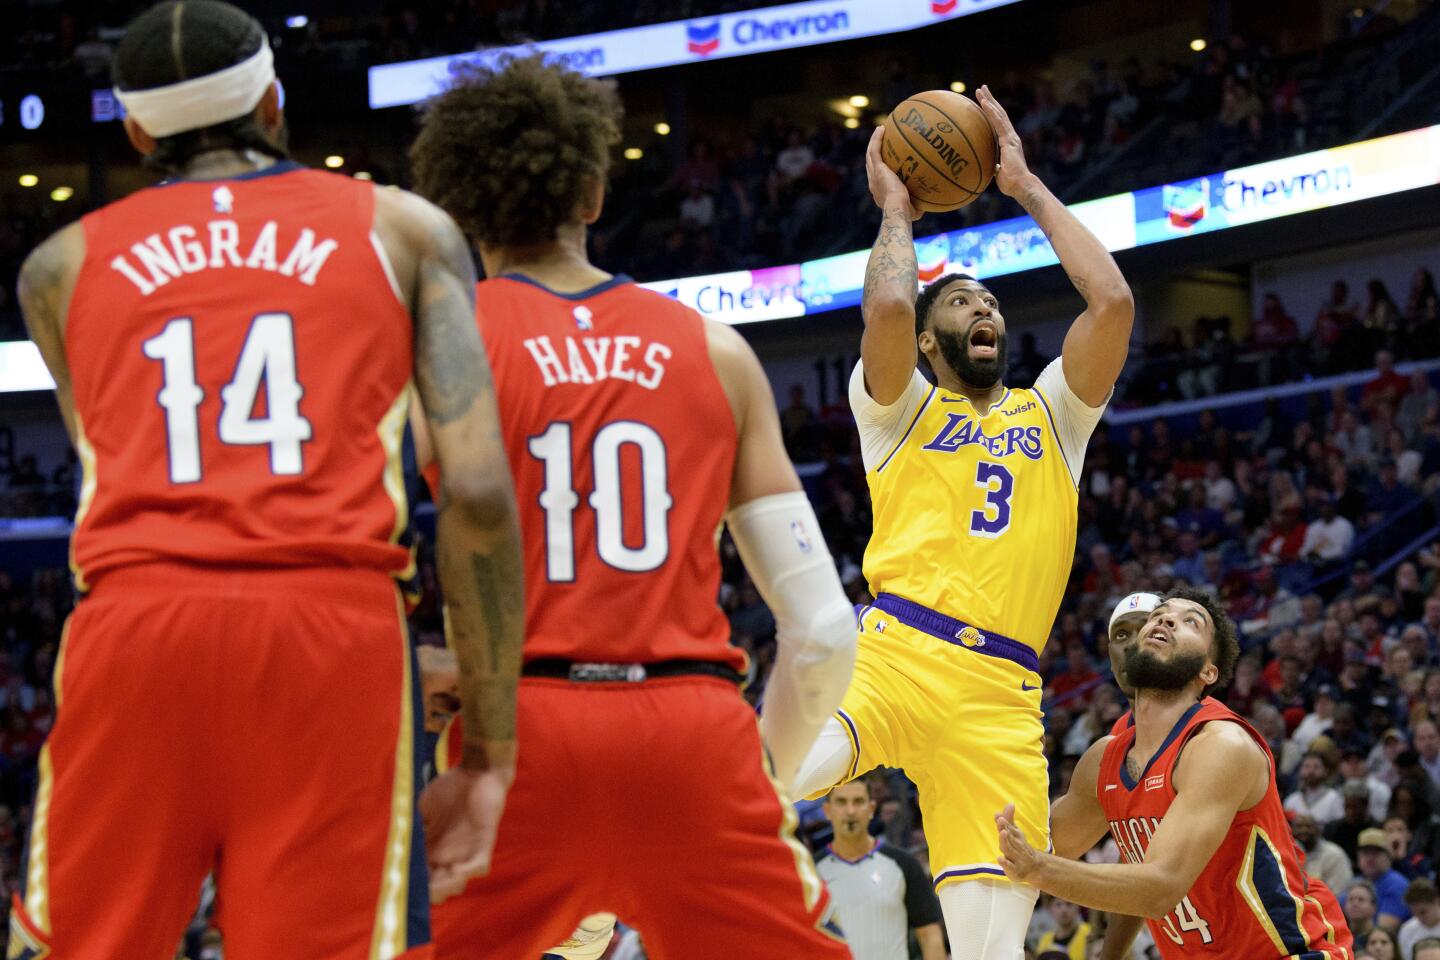 Lakers forward Anthony Davis (3) puts up a shot against the Pelicans during the first half of a game Nov. 27 at Smoothie King Center.